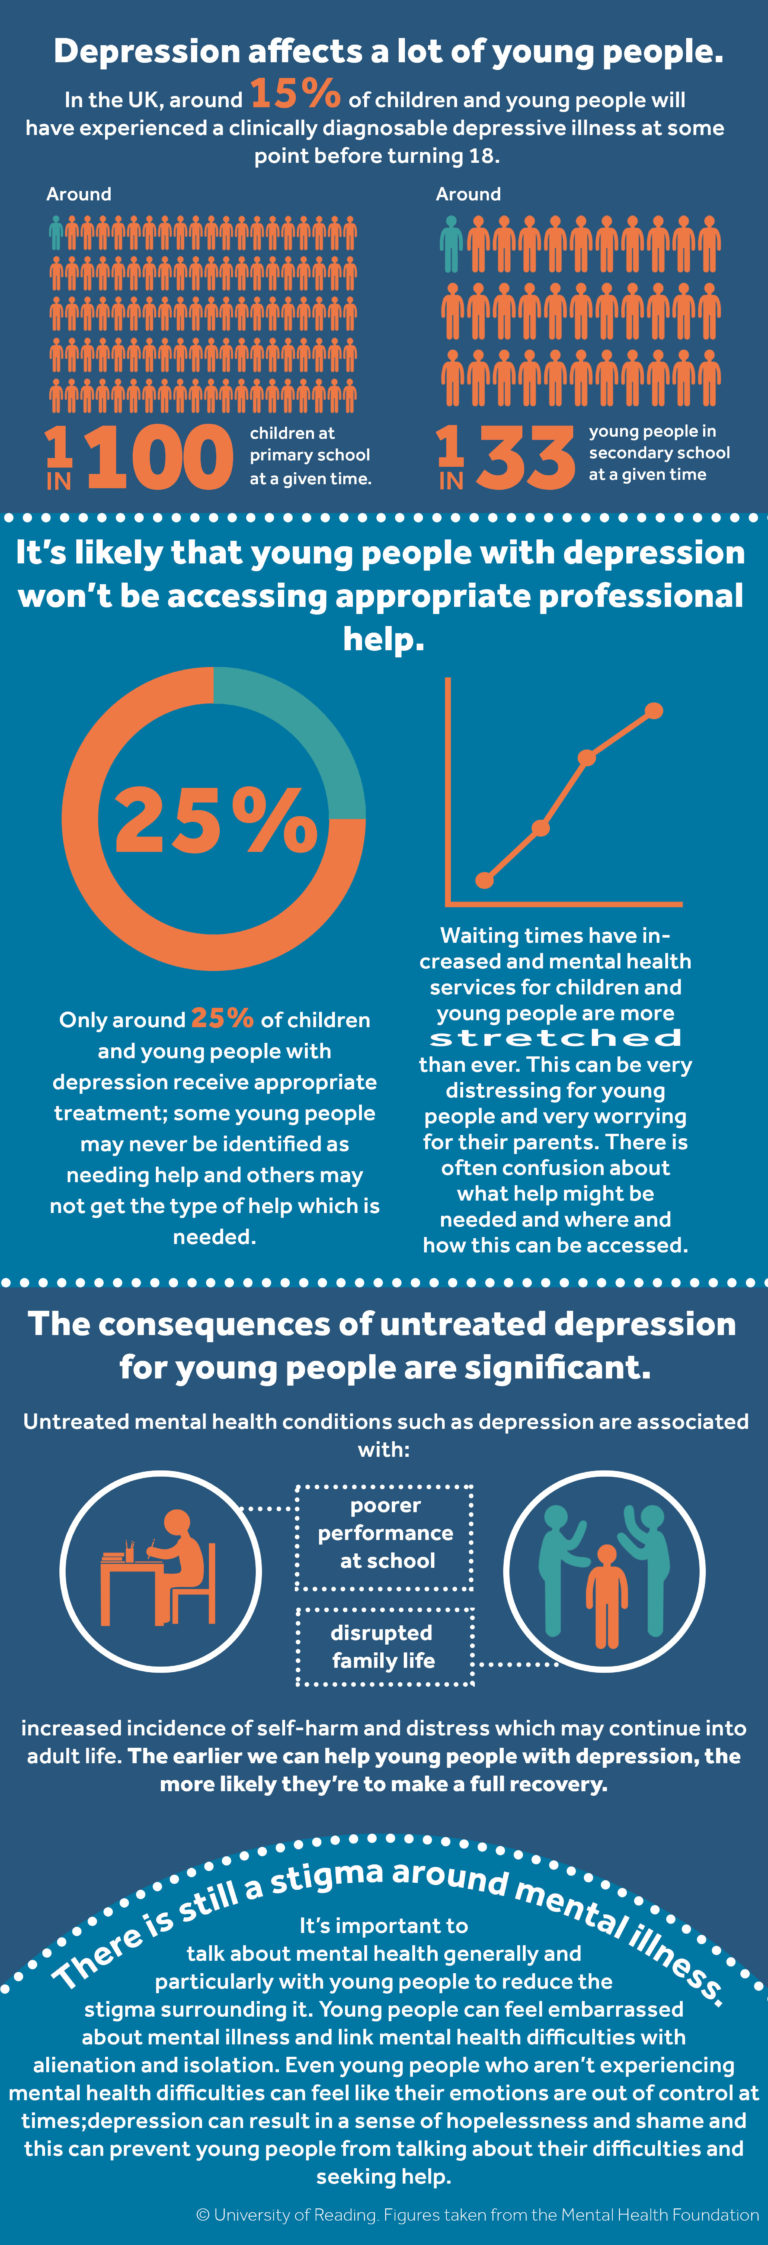 **Depression affects a lot of young people.** In the UK, around 15% of children and young people will have experienced a clinically diagnosable depressive illness at some point before turning 18 (around 1 in 100 children at primary school and 1 in 33 young people in secondary school at a given time). **It’s likely that young people with depression won’t be accessing appropriate professional help.** Only around 25% of children and young people with depression receive appropriate treatment; some young people may never be identified as needing help and others may not get the type of help which is needed. Waiting times have increased and mental health services for children and young people are more stretched than ever. This can be very distressing for young people and very worrying for their parents. There is often confusion about what help might be needed and where and how this can be accessed. **The consequences of untreated depression for young people are significant.** Untreated mental health conditions such as depression are associated with poorer performance at school, disrupted family life, increased incidence of self-harm and distress which may continue into adult life. The earlier we can help young people with depression, the more likely they are to make a full recovery. **There is still a stigma around mental illness.** It’s important to talk about mental health generally and particularly with young people to reduce the stigma surrounding it. Young people can feel embarrassed about mental illness and link mental health difficulties with alienation and isolation. Even young people who aren’t experiencing mental health difficulties can feel like their emotions are out of control at times; depression can result in a sense of hopelessness and shame and this can prevent young people from talking about their difficulties and seeking help. We're extremely keen to develop this programme to increase public knowledge around depression in young people, and we wanted to provide a resource which would be helpful to both parents and professionals. We hope that by offering information about the condition itself and outlining practical ways to offer support, that young people with depression will feel more understood and better supported. **Some of the factors which may influence a young person’s depression may be outside your control. It’s important to remember that there are many steps you can take to promote positive mental health and make a real difference.**